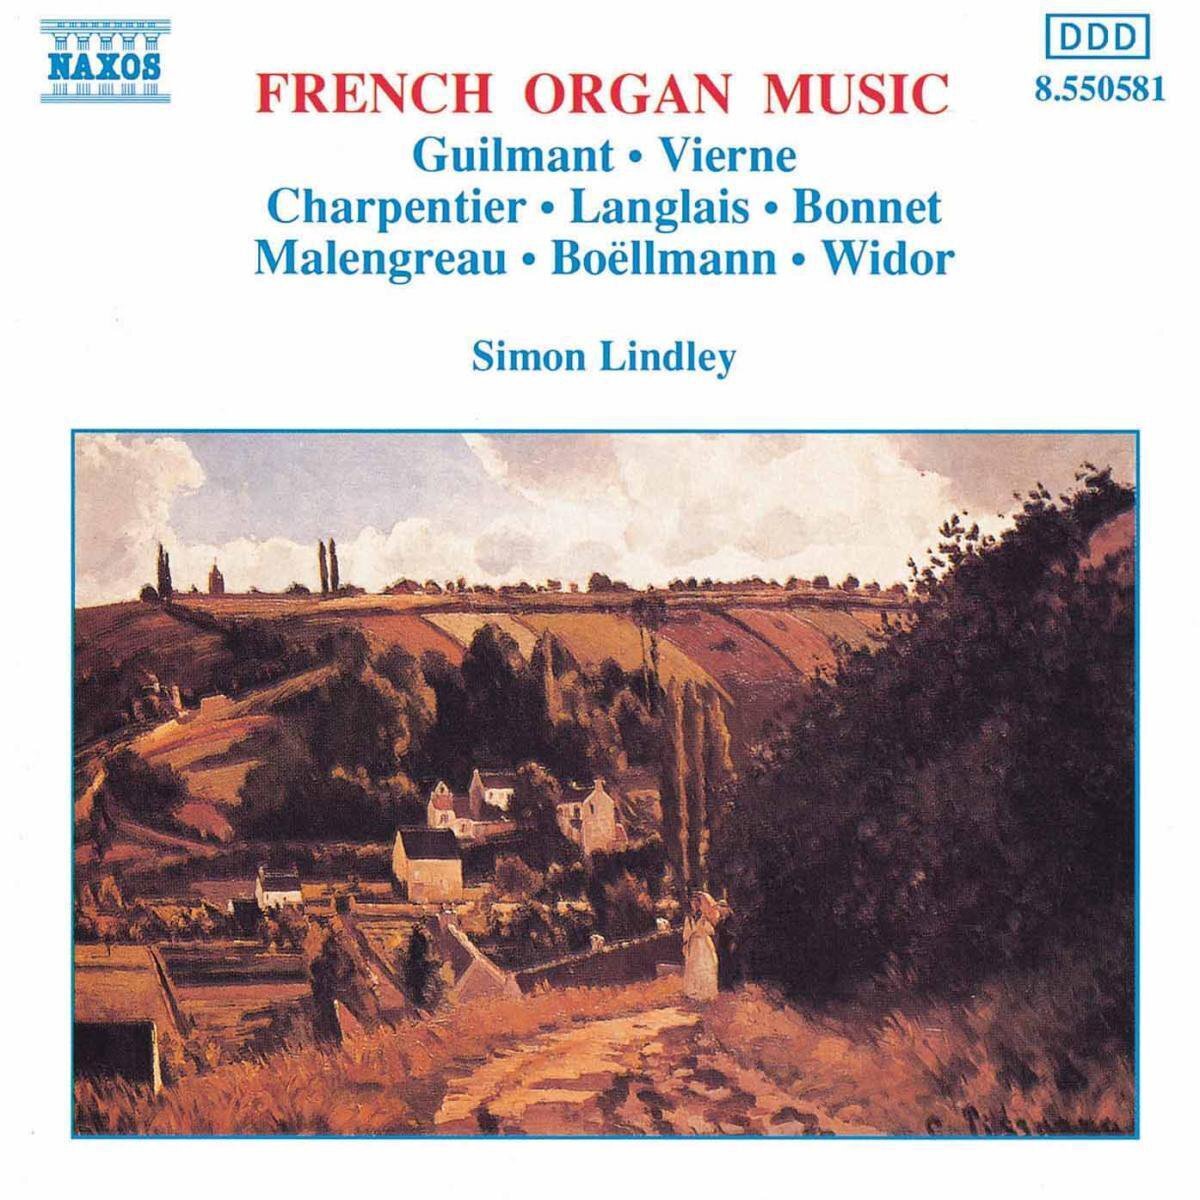 OUTHERE AA.VV., Charpentier Marc-antoine, Bonnet Joseph: French Organ Music